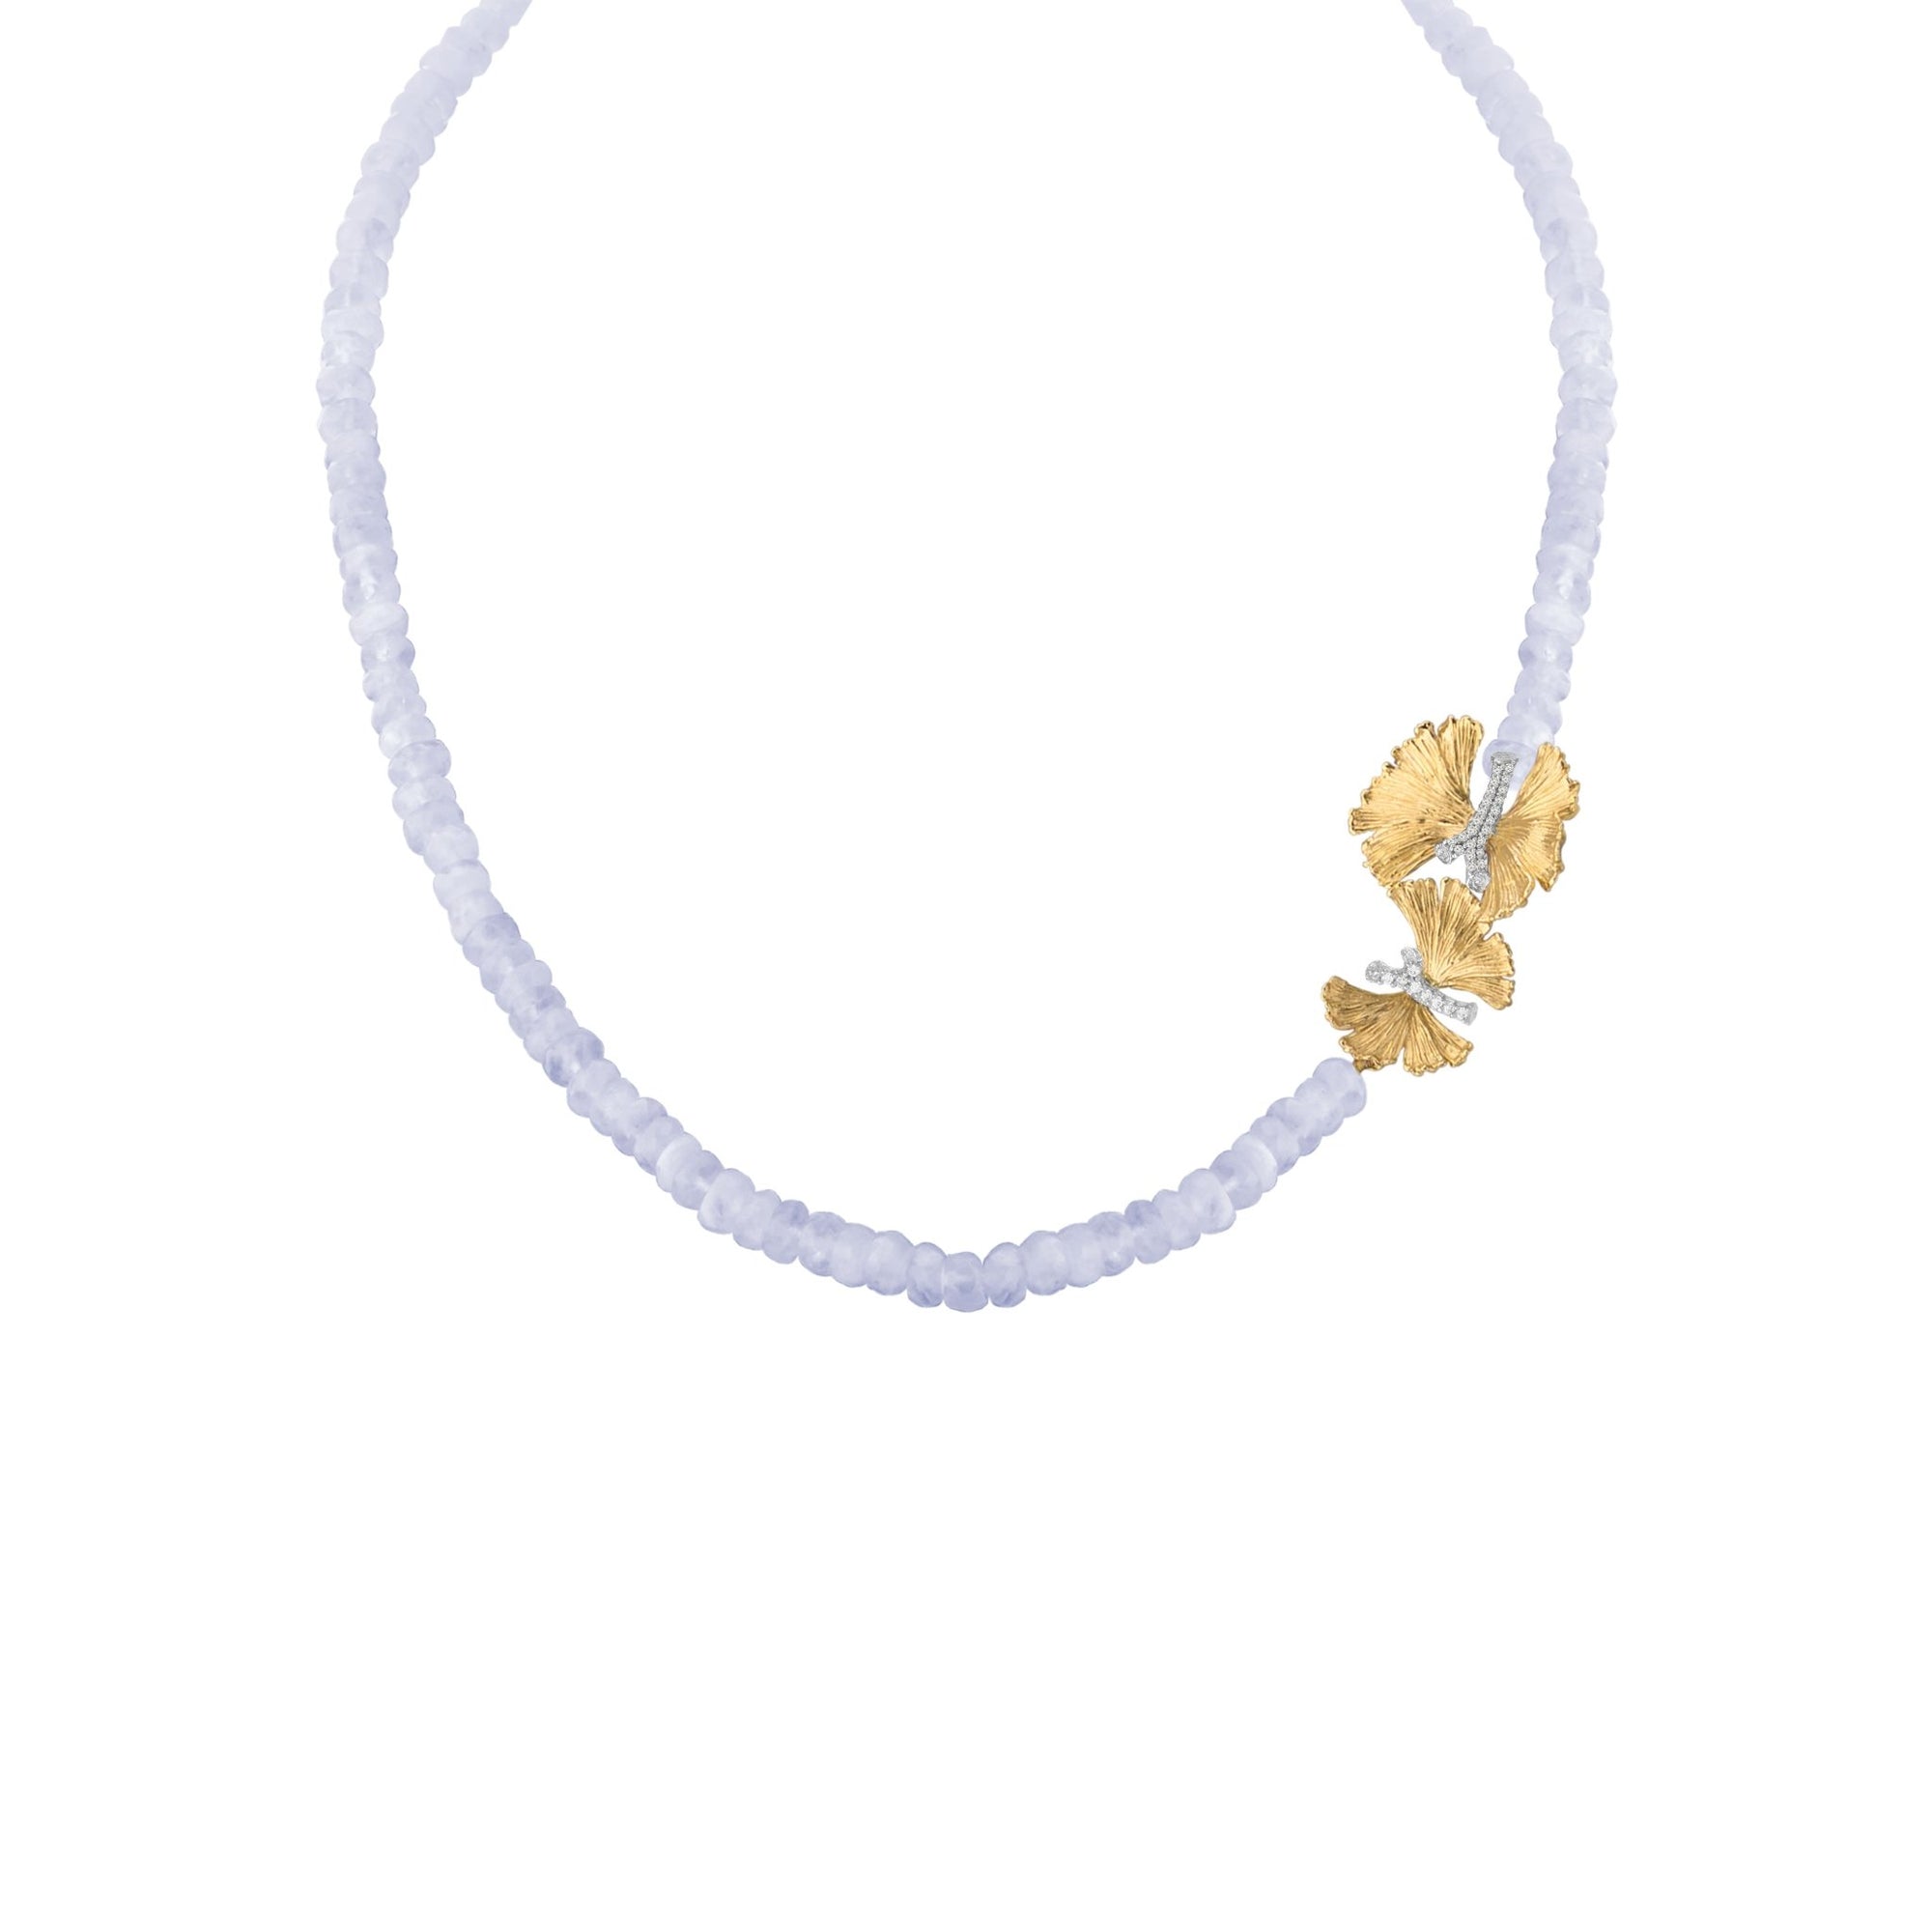 Michael Aram Butterfly Ginkgo Necklace with Chalcedony and Diamonds